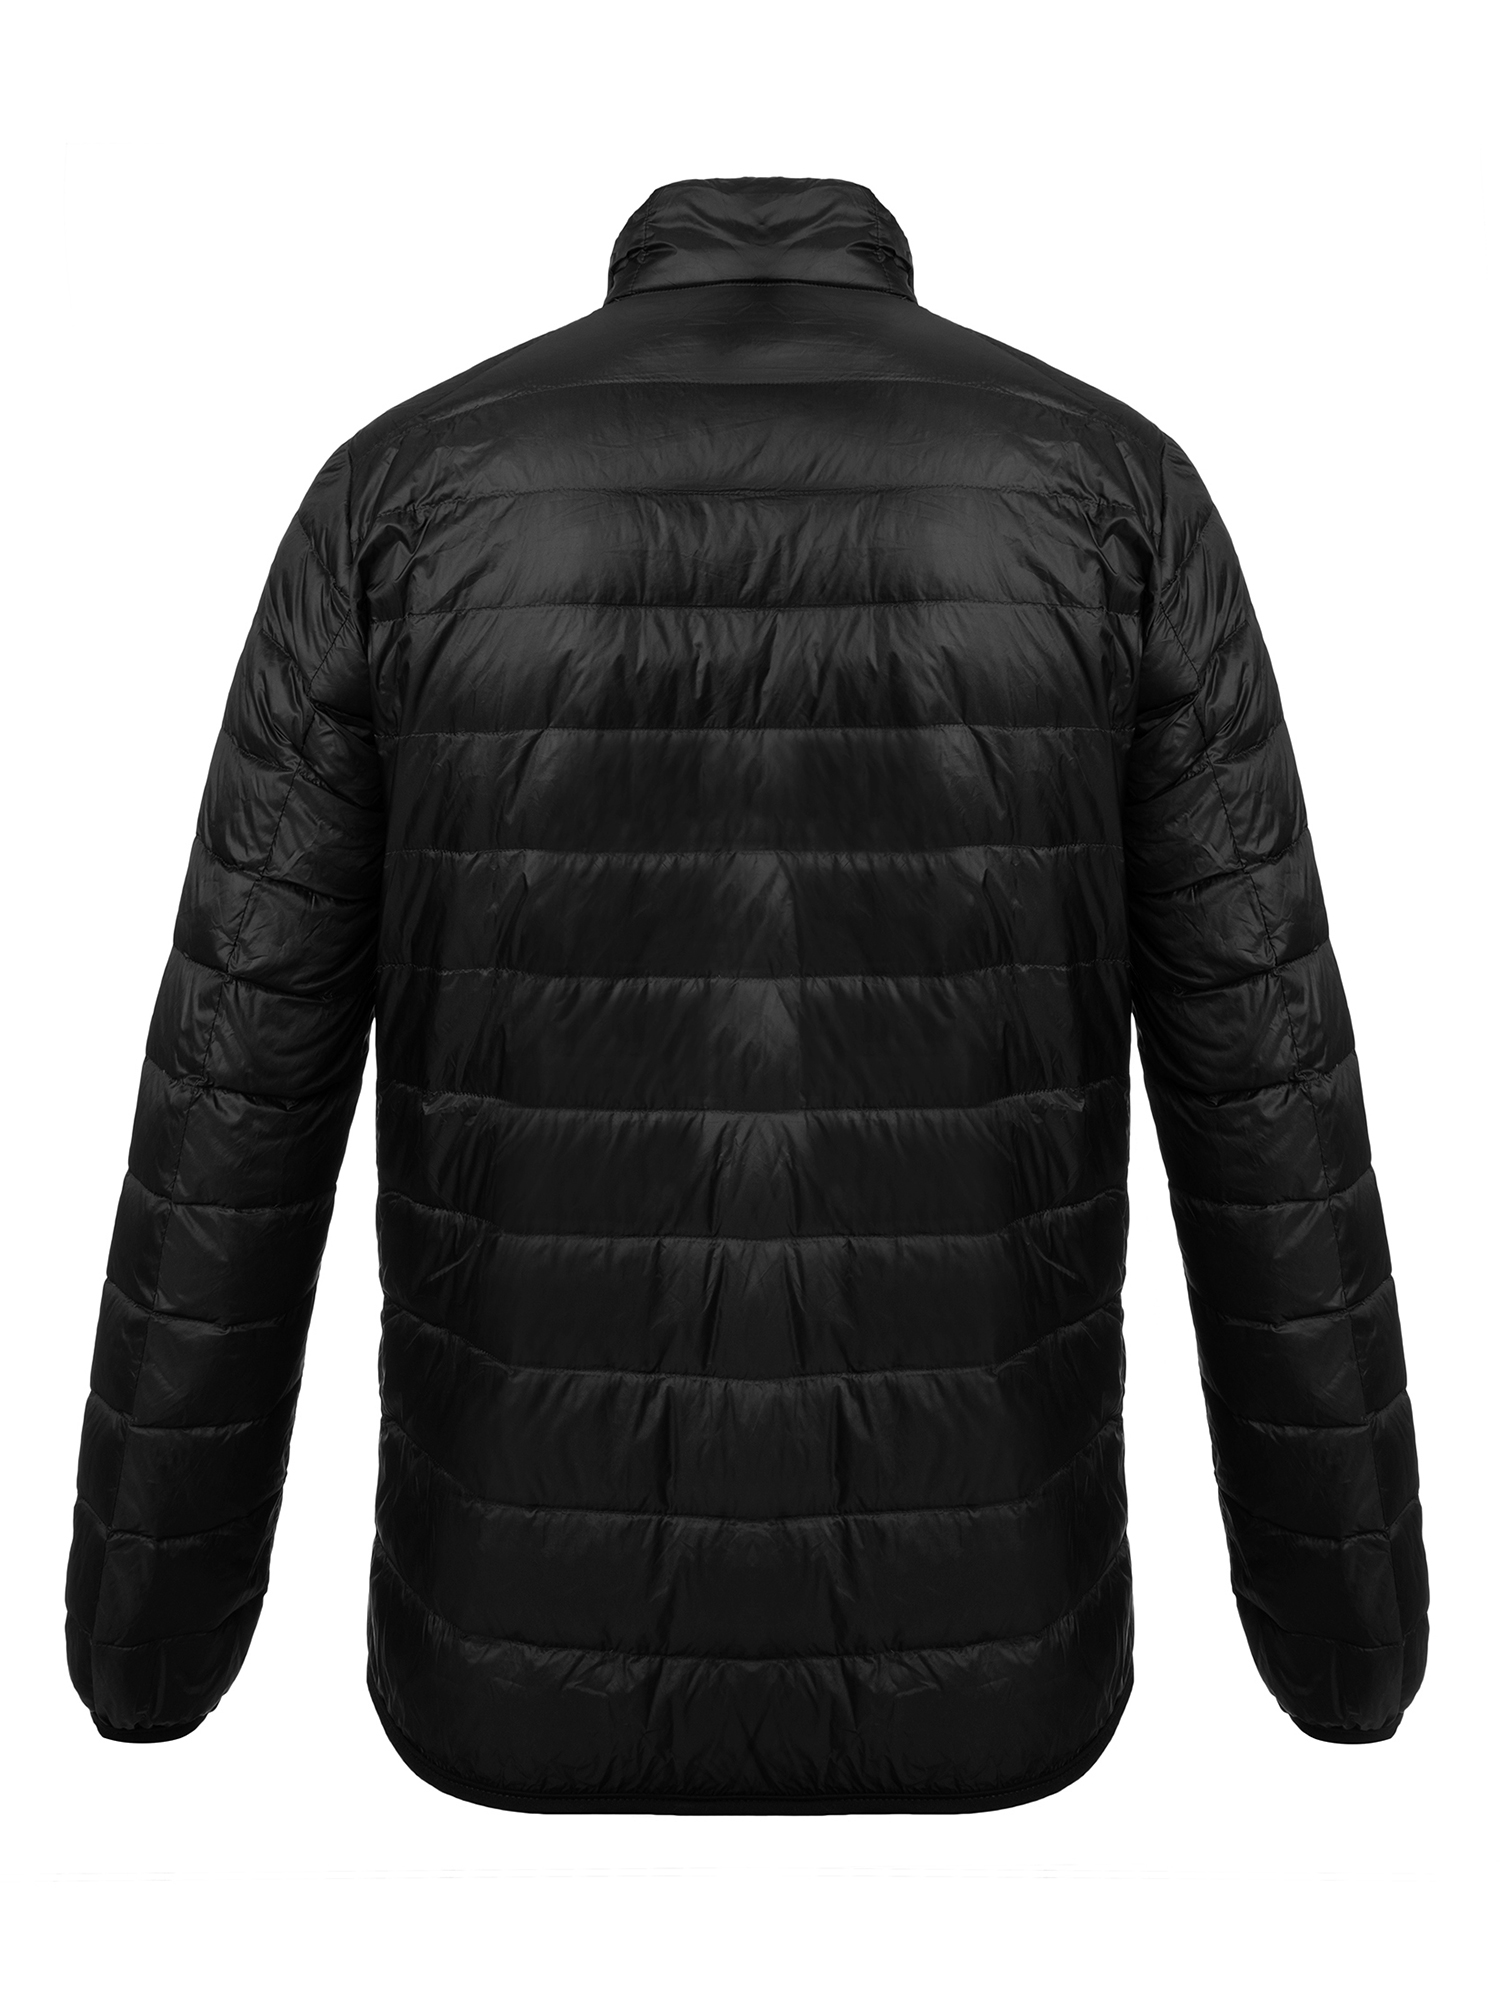 Men's Slim Fit Lightweight Zip Insulated Packable Down Puffer Jacket Packable Water-Resistant Rain Coat Puffer Jacket (Standard 2XL and Big & Tall ) - image 2 of 8